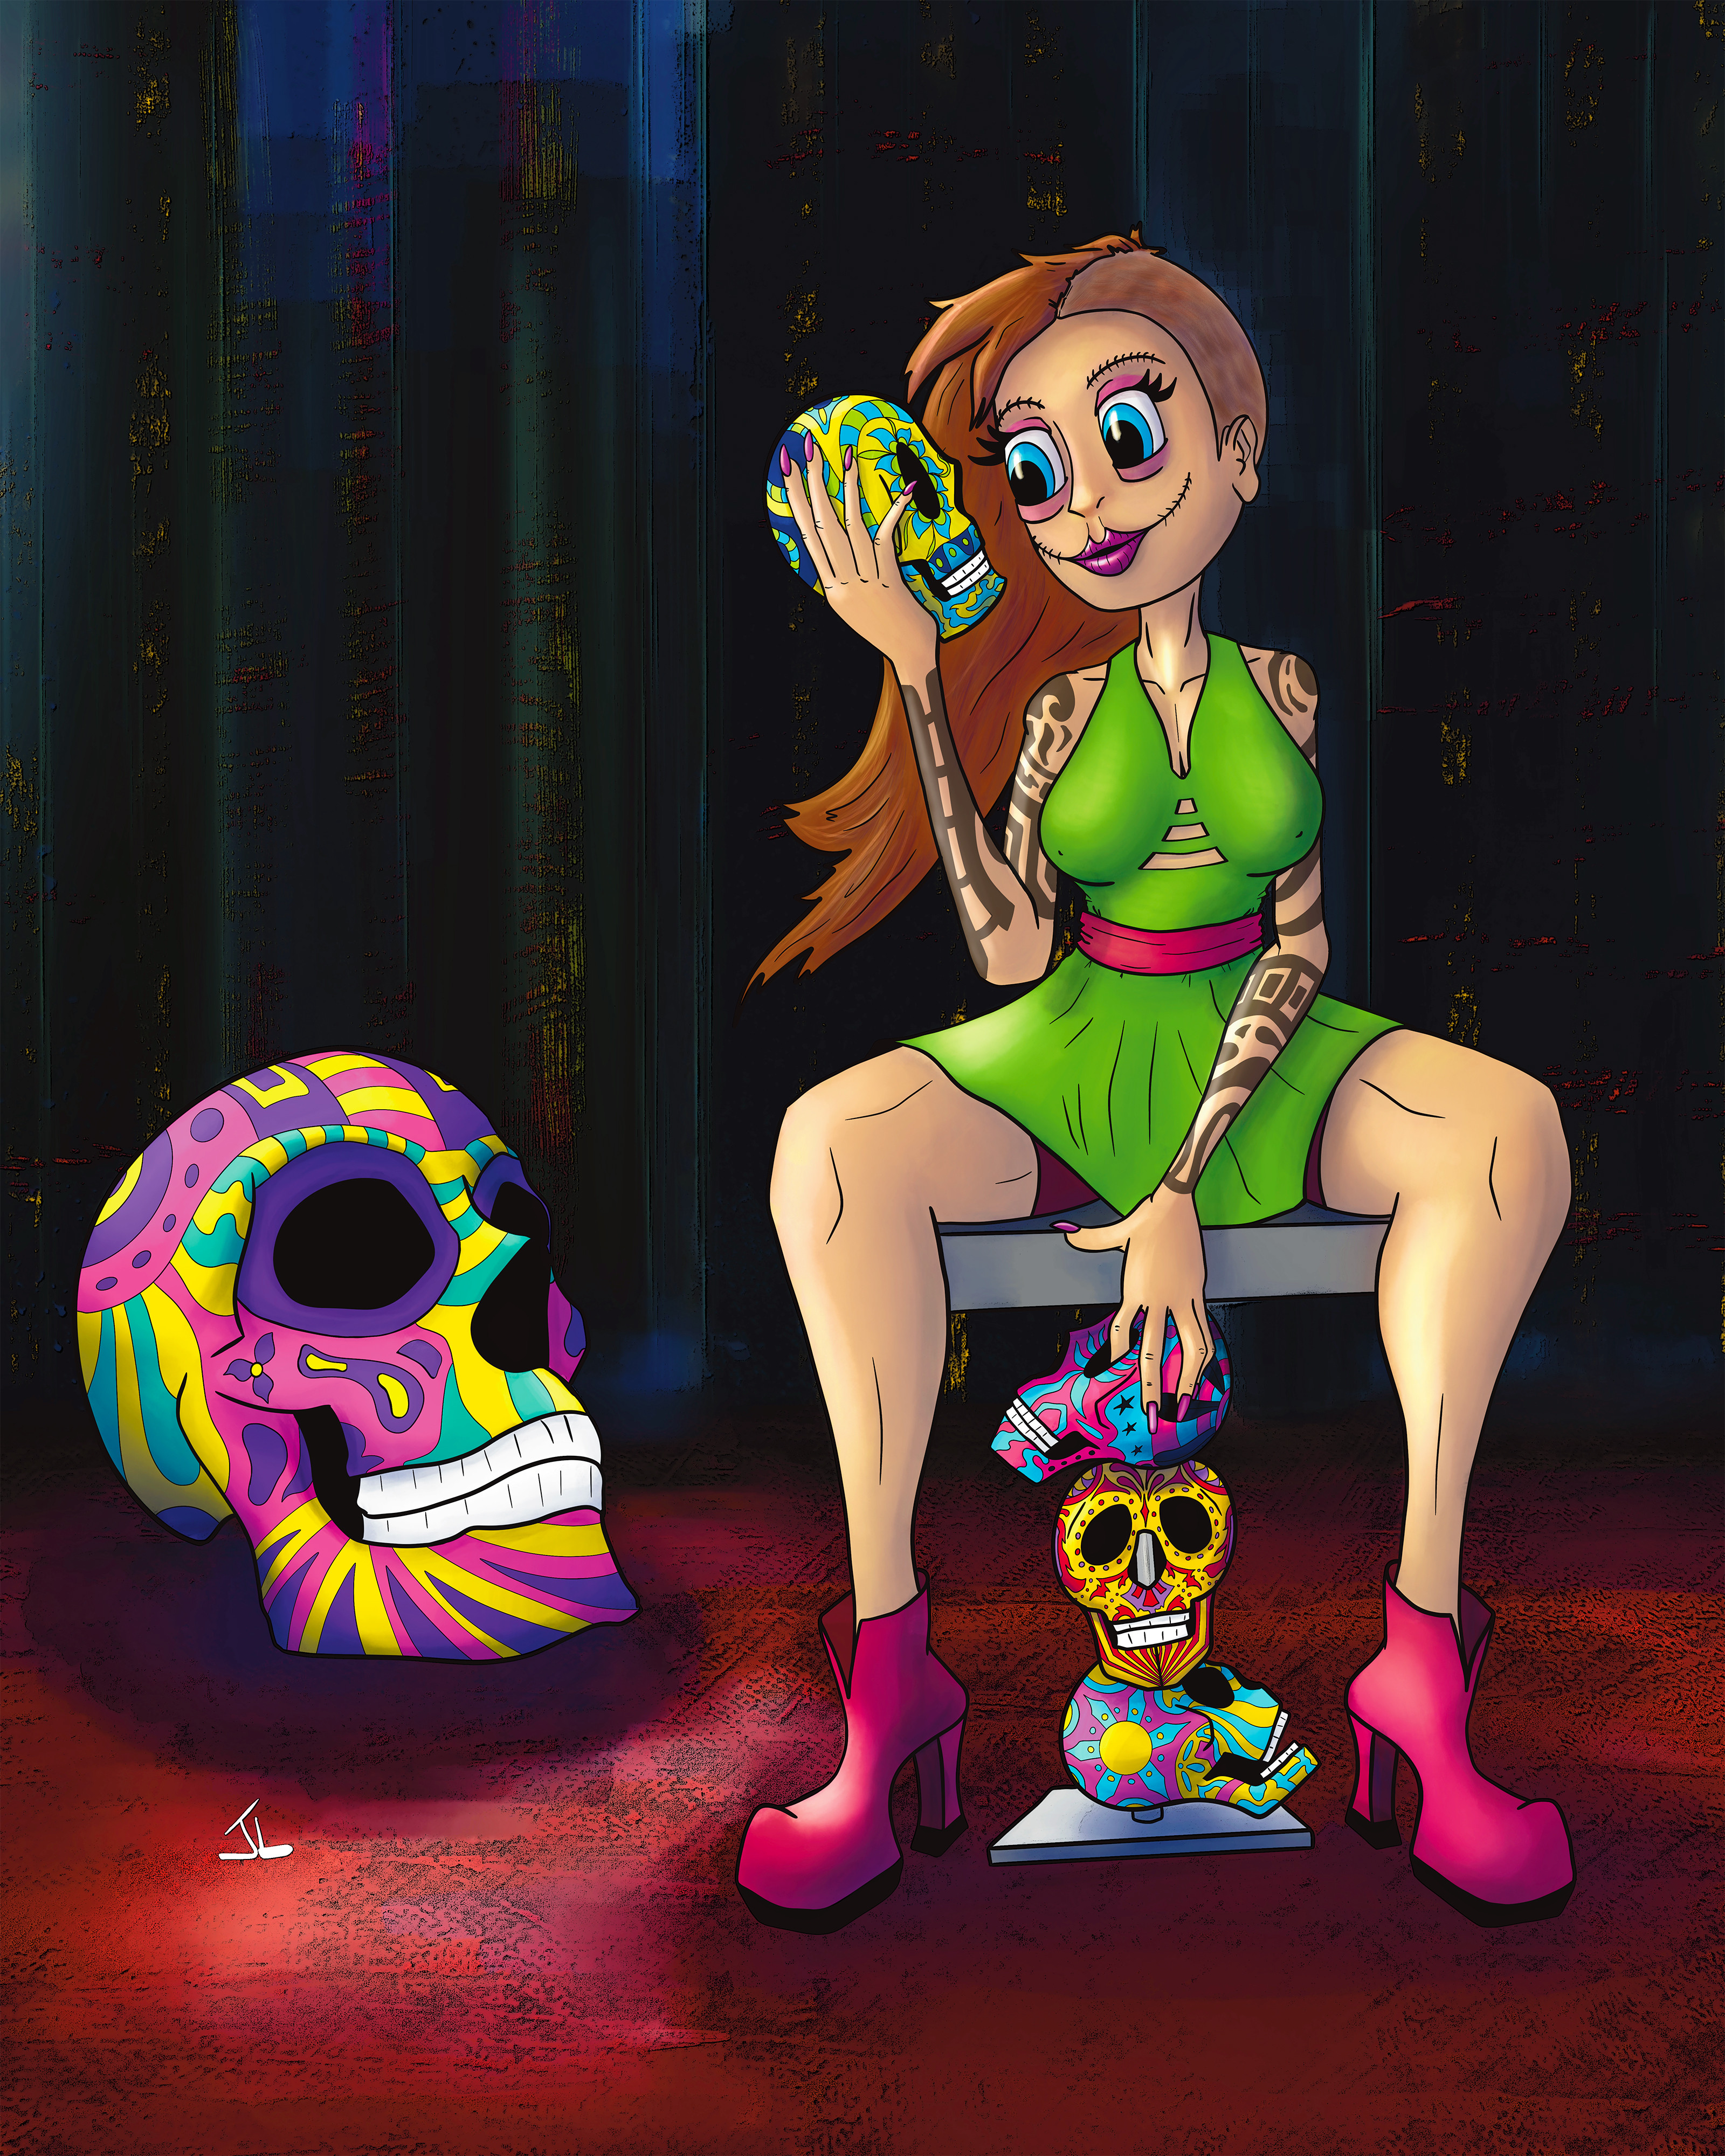 In 2023, I worked on a series of pinup style illustrations which included this character. I ended up calling it "Candy Skulls" but the original working title was Giant Slayer on account of that giant skull in the background. 